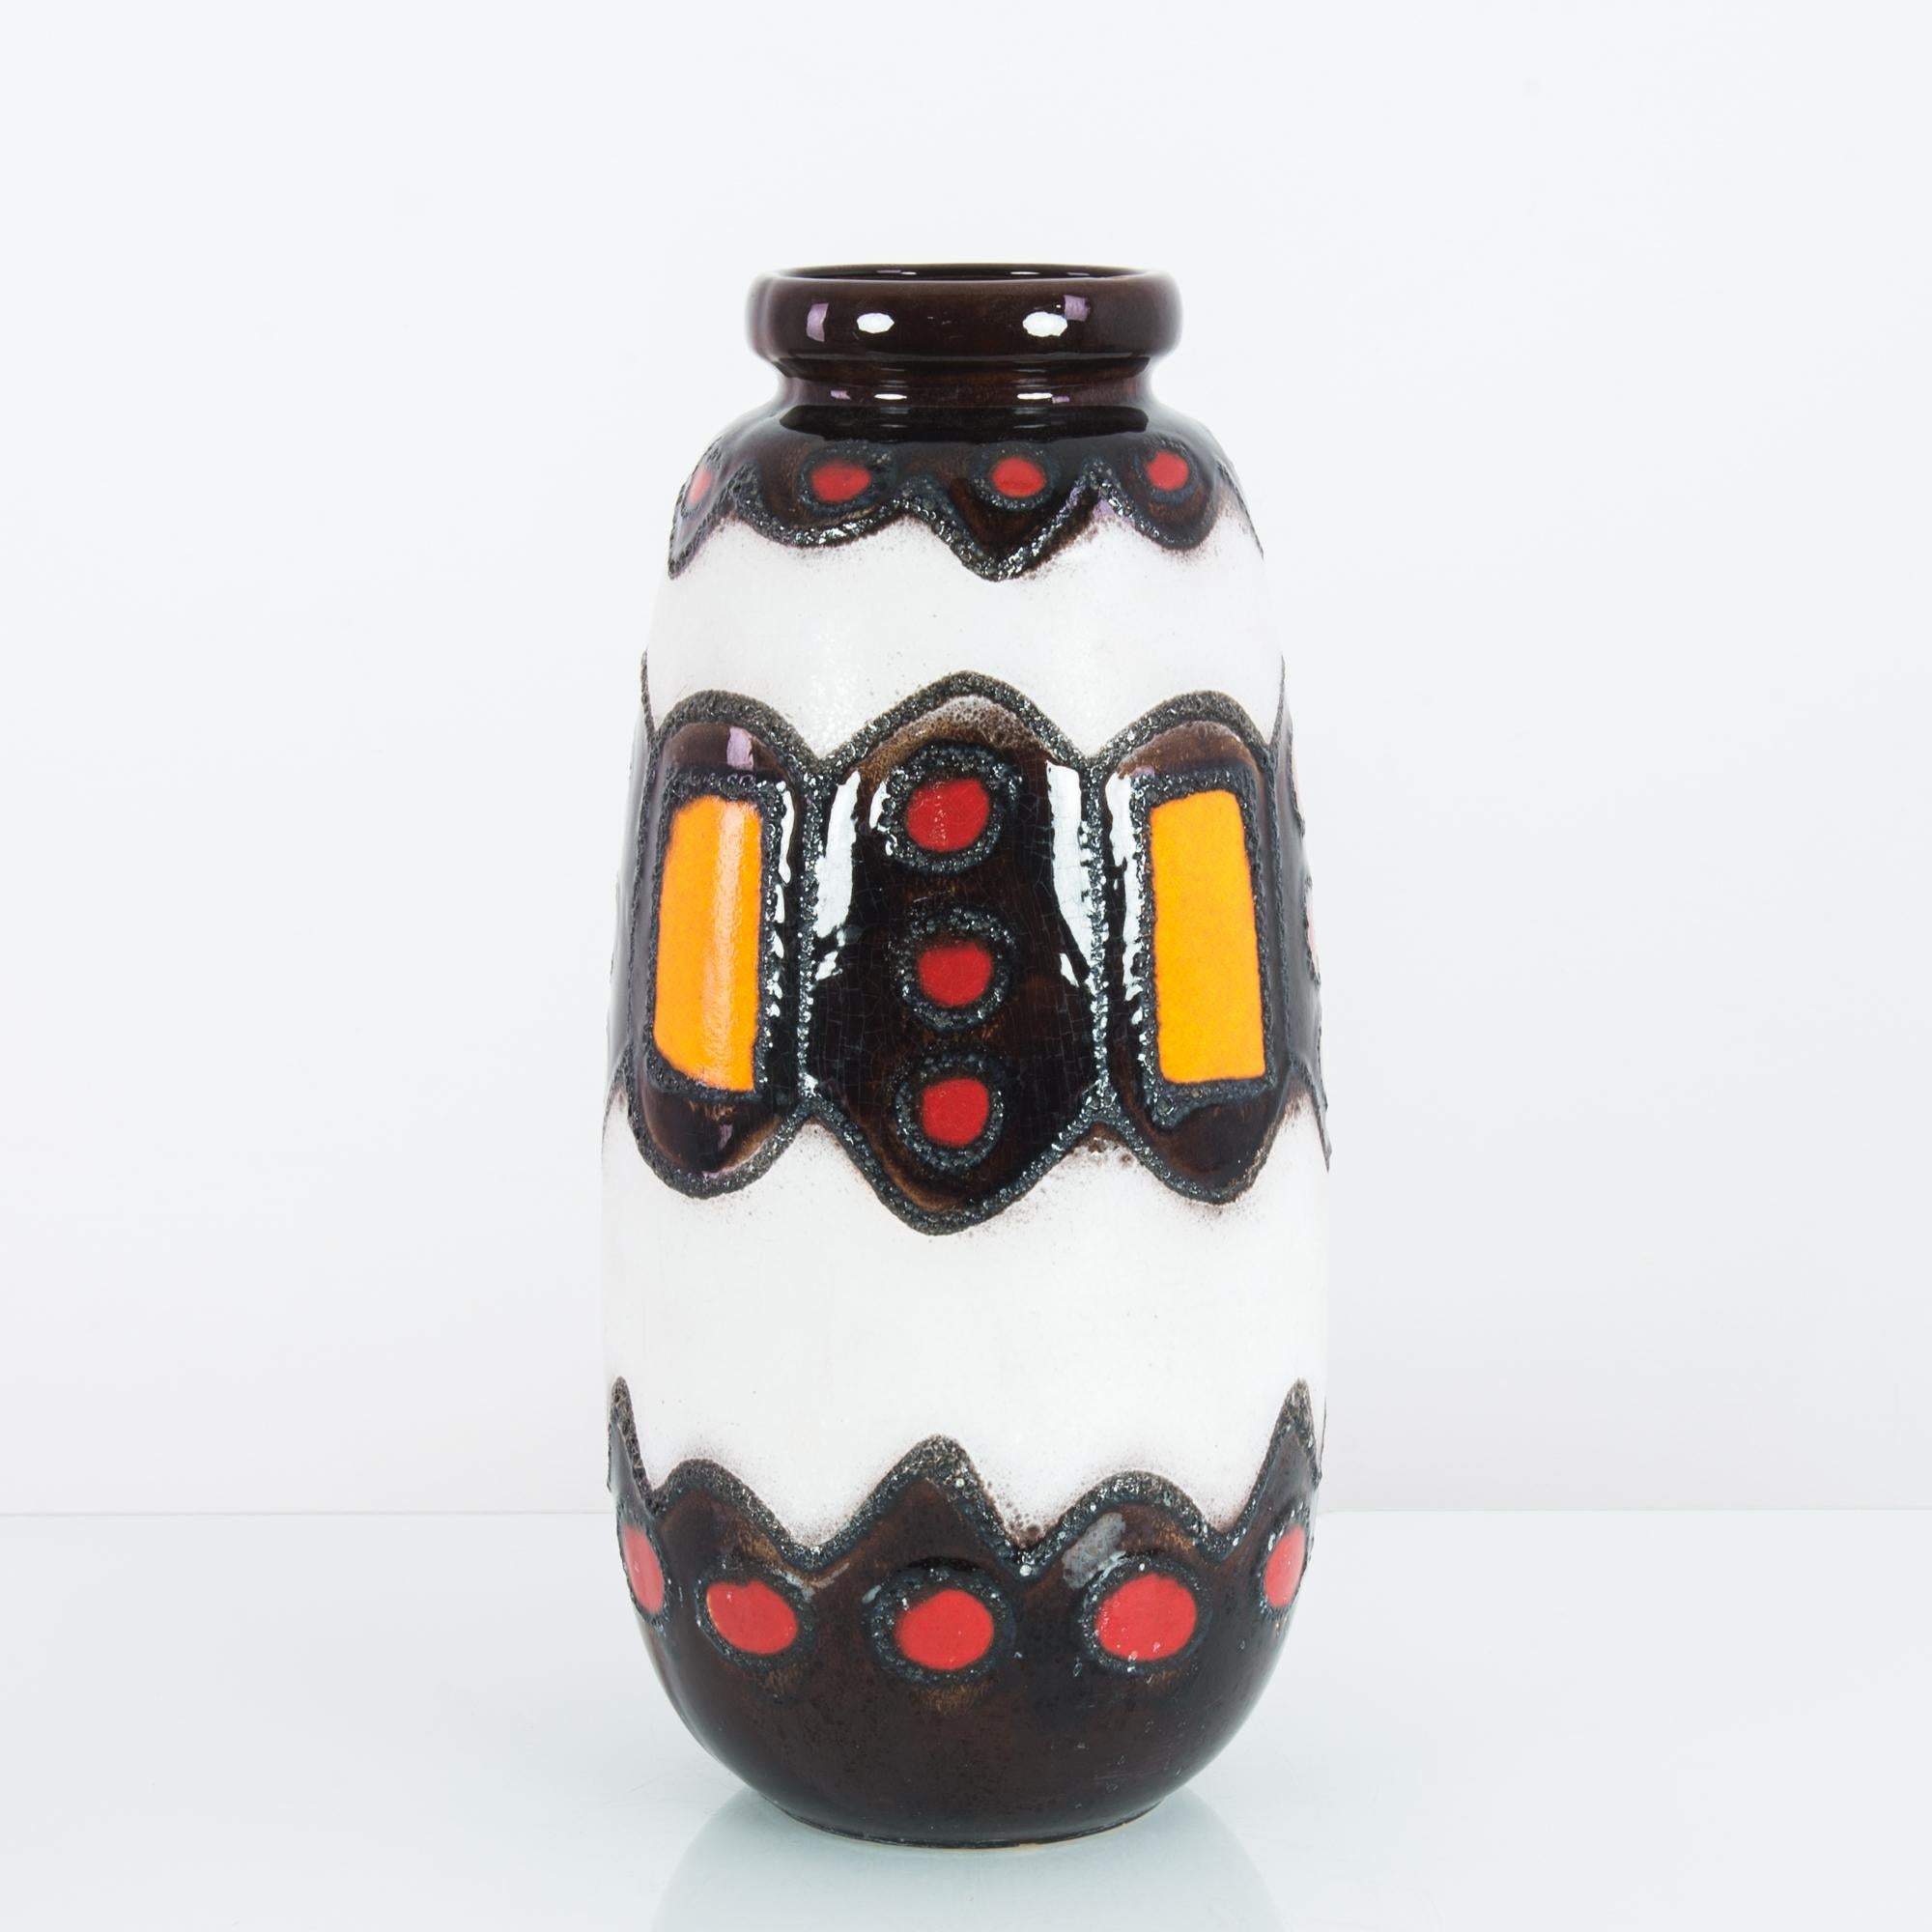 A ceramic vase from West Germany, produced circa 1960. A ceramic vase in thick, vibrant, glistening glaze. Sharp juxtaposition of white crisply outlined against the brightly patterned dark brown almost black bands make this piece pop. The influence